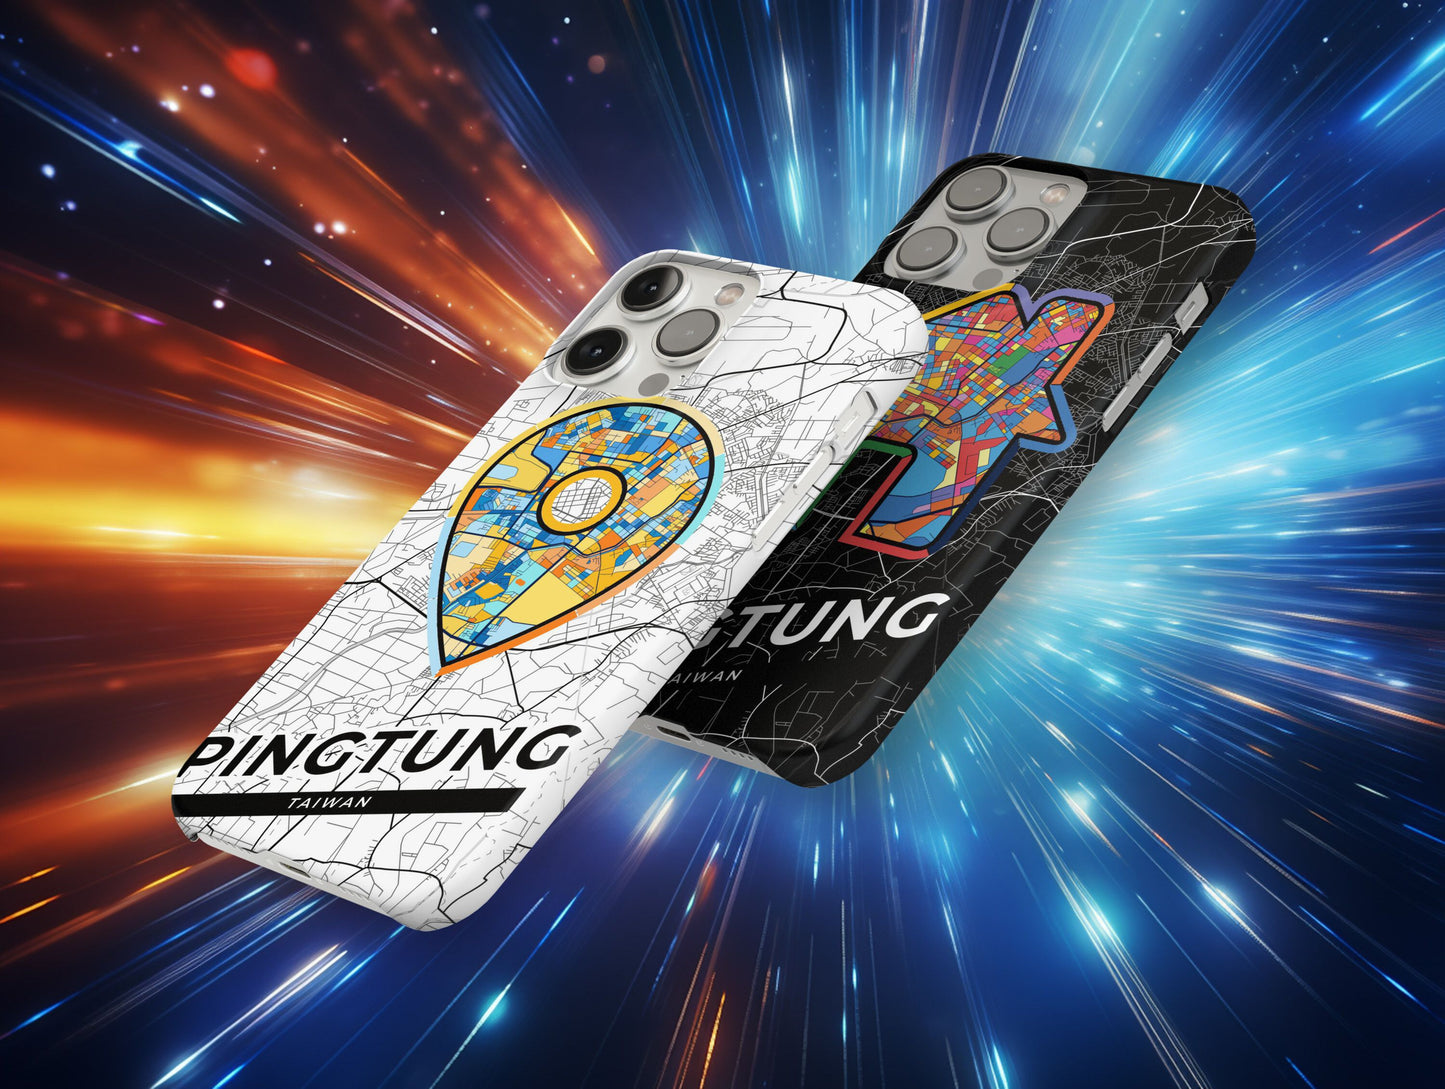 Pingtung Taiwan slim phone case with colorful icon